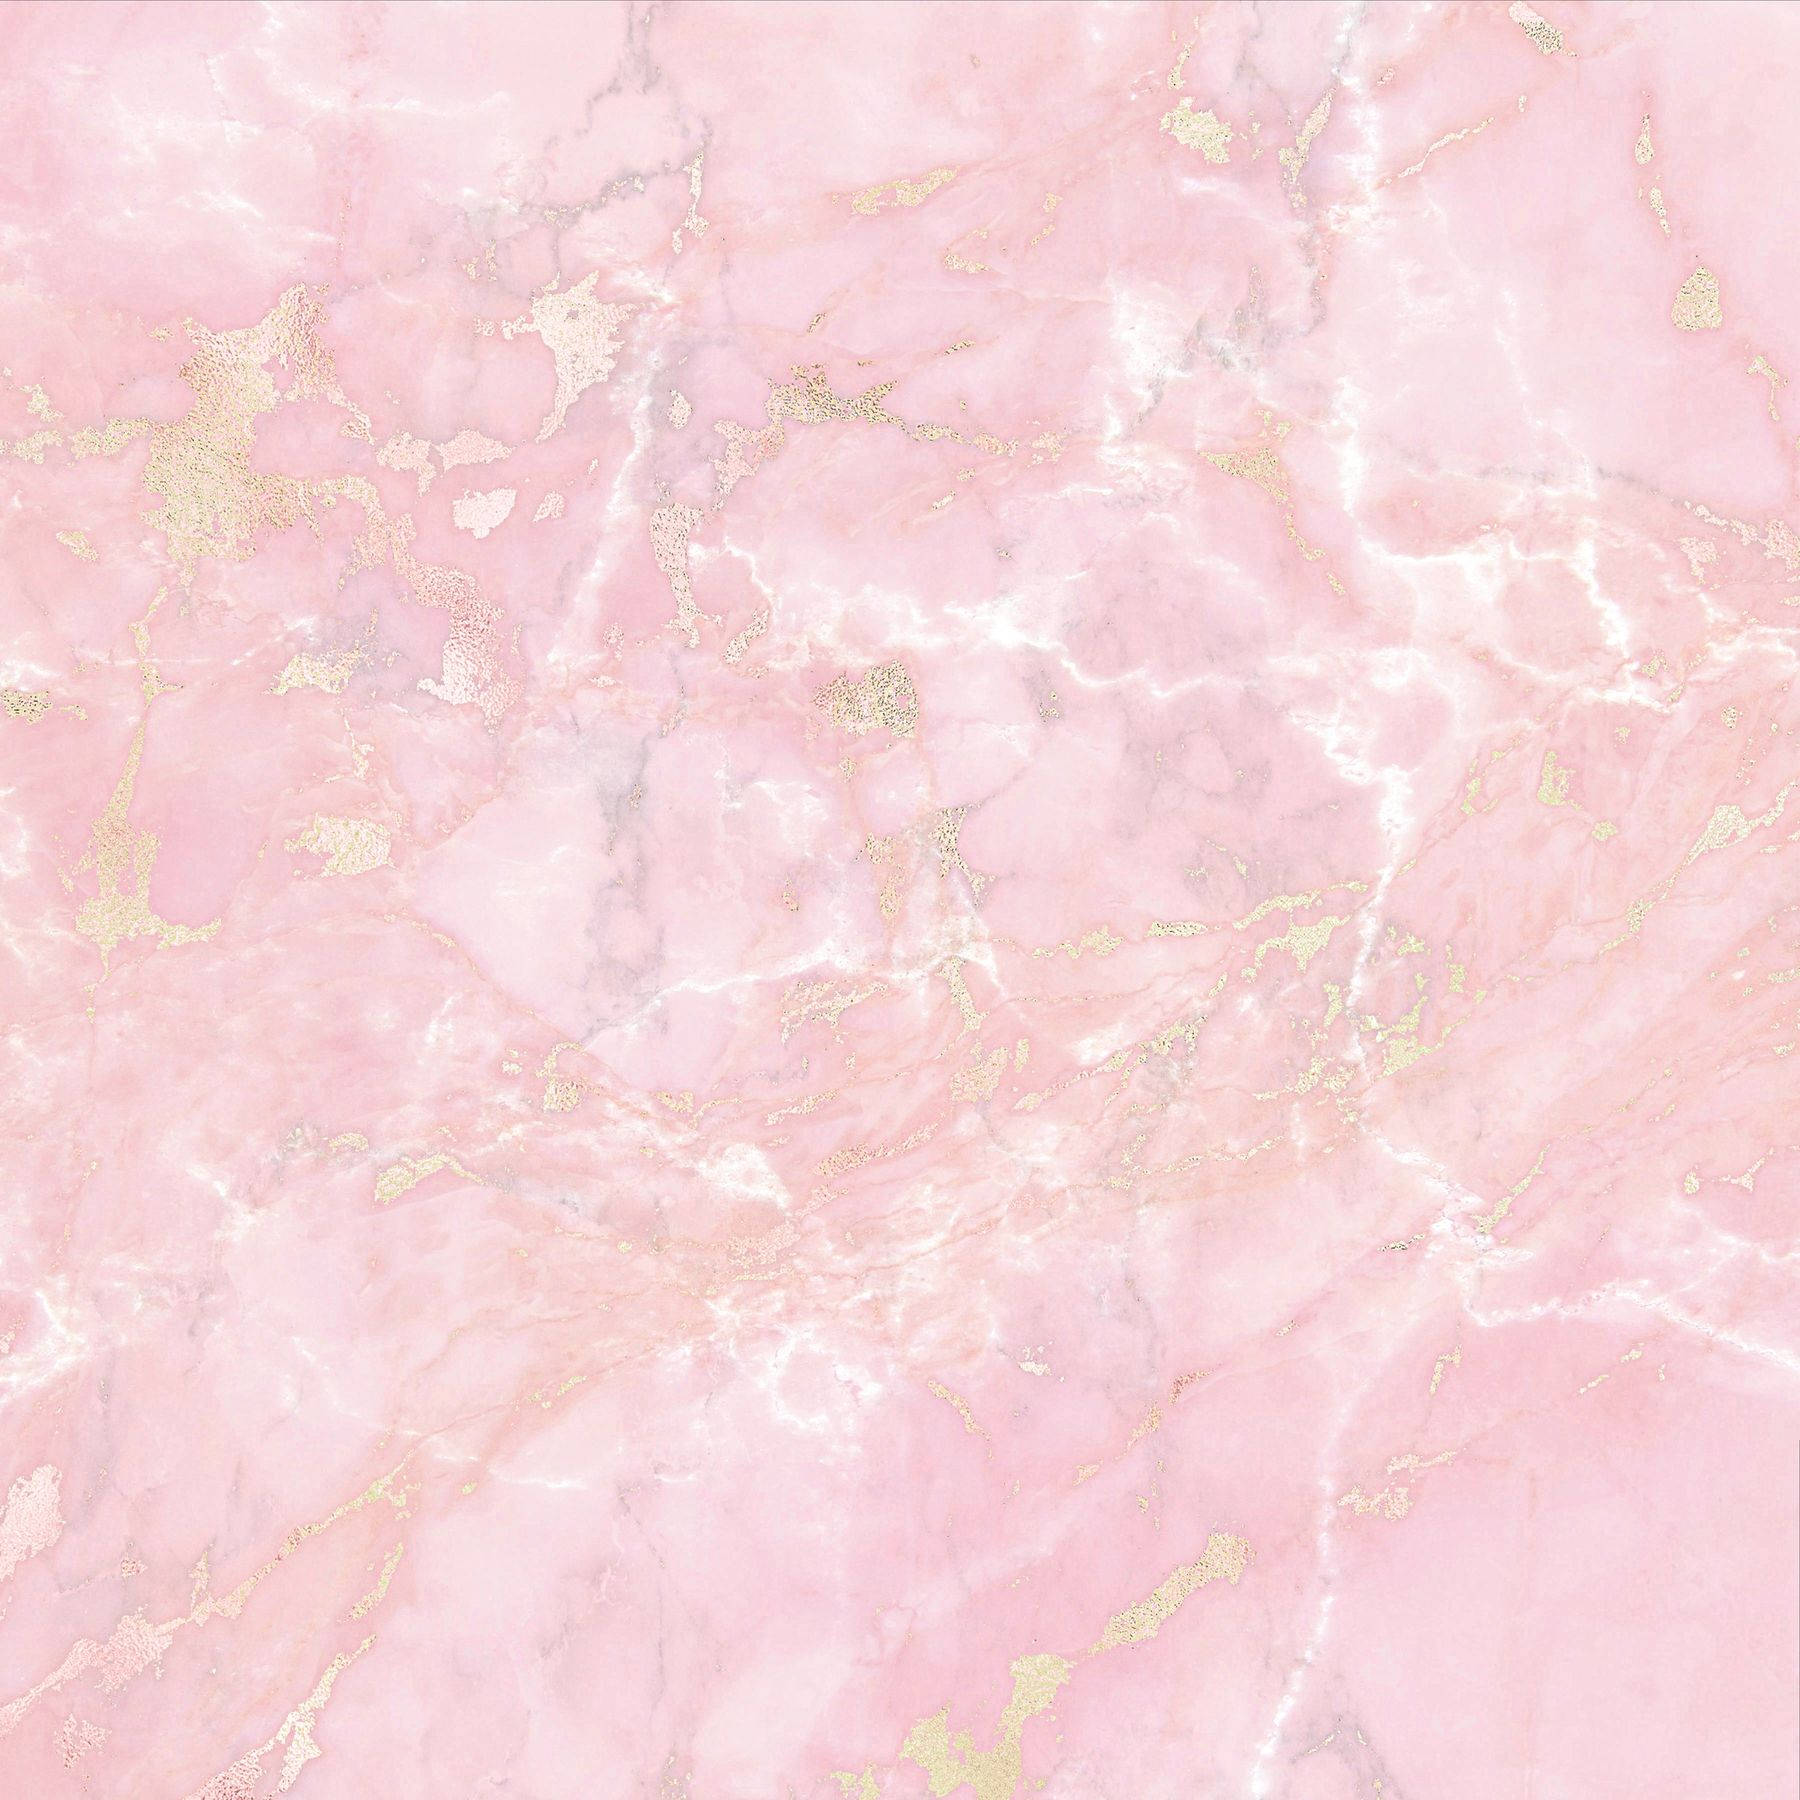 Elegant Pink Marble Texture With Gold Dust